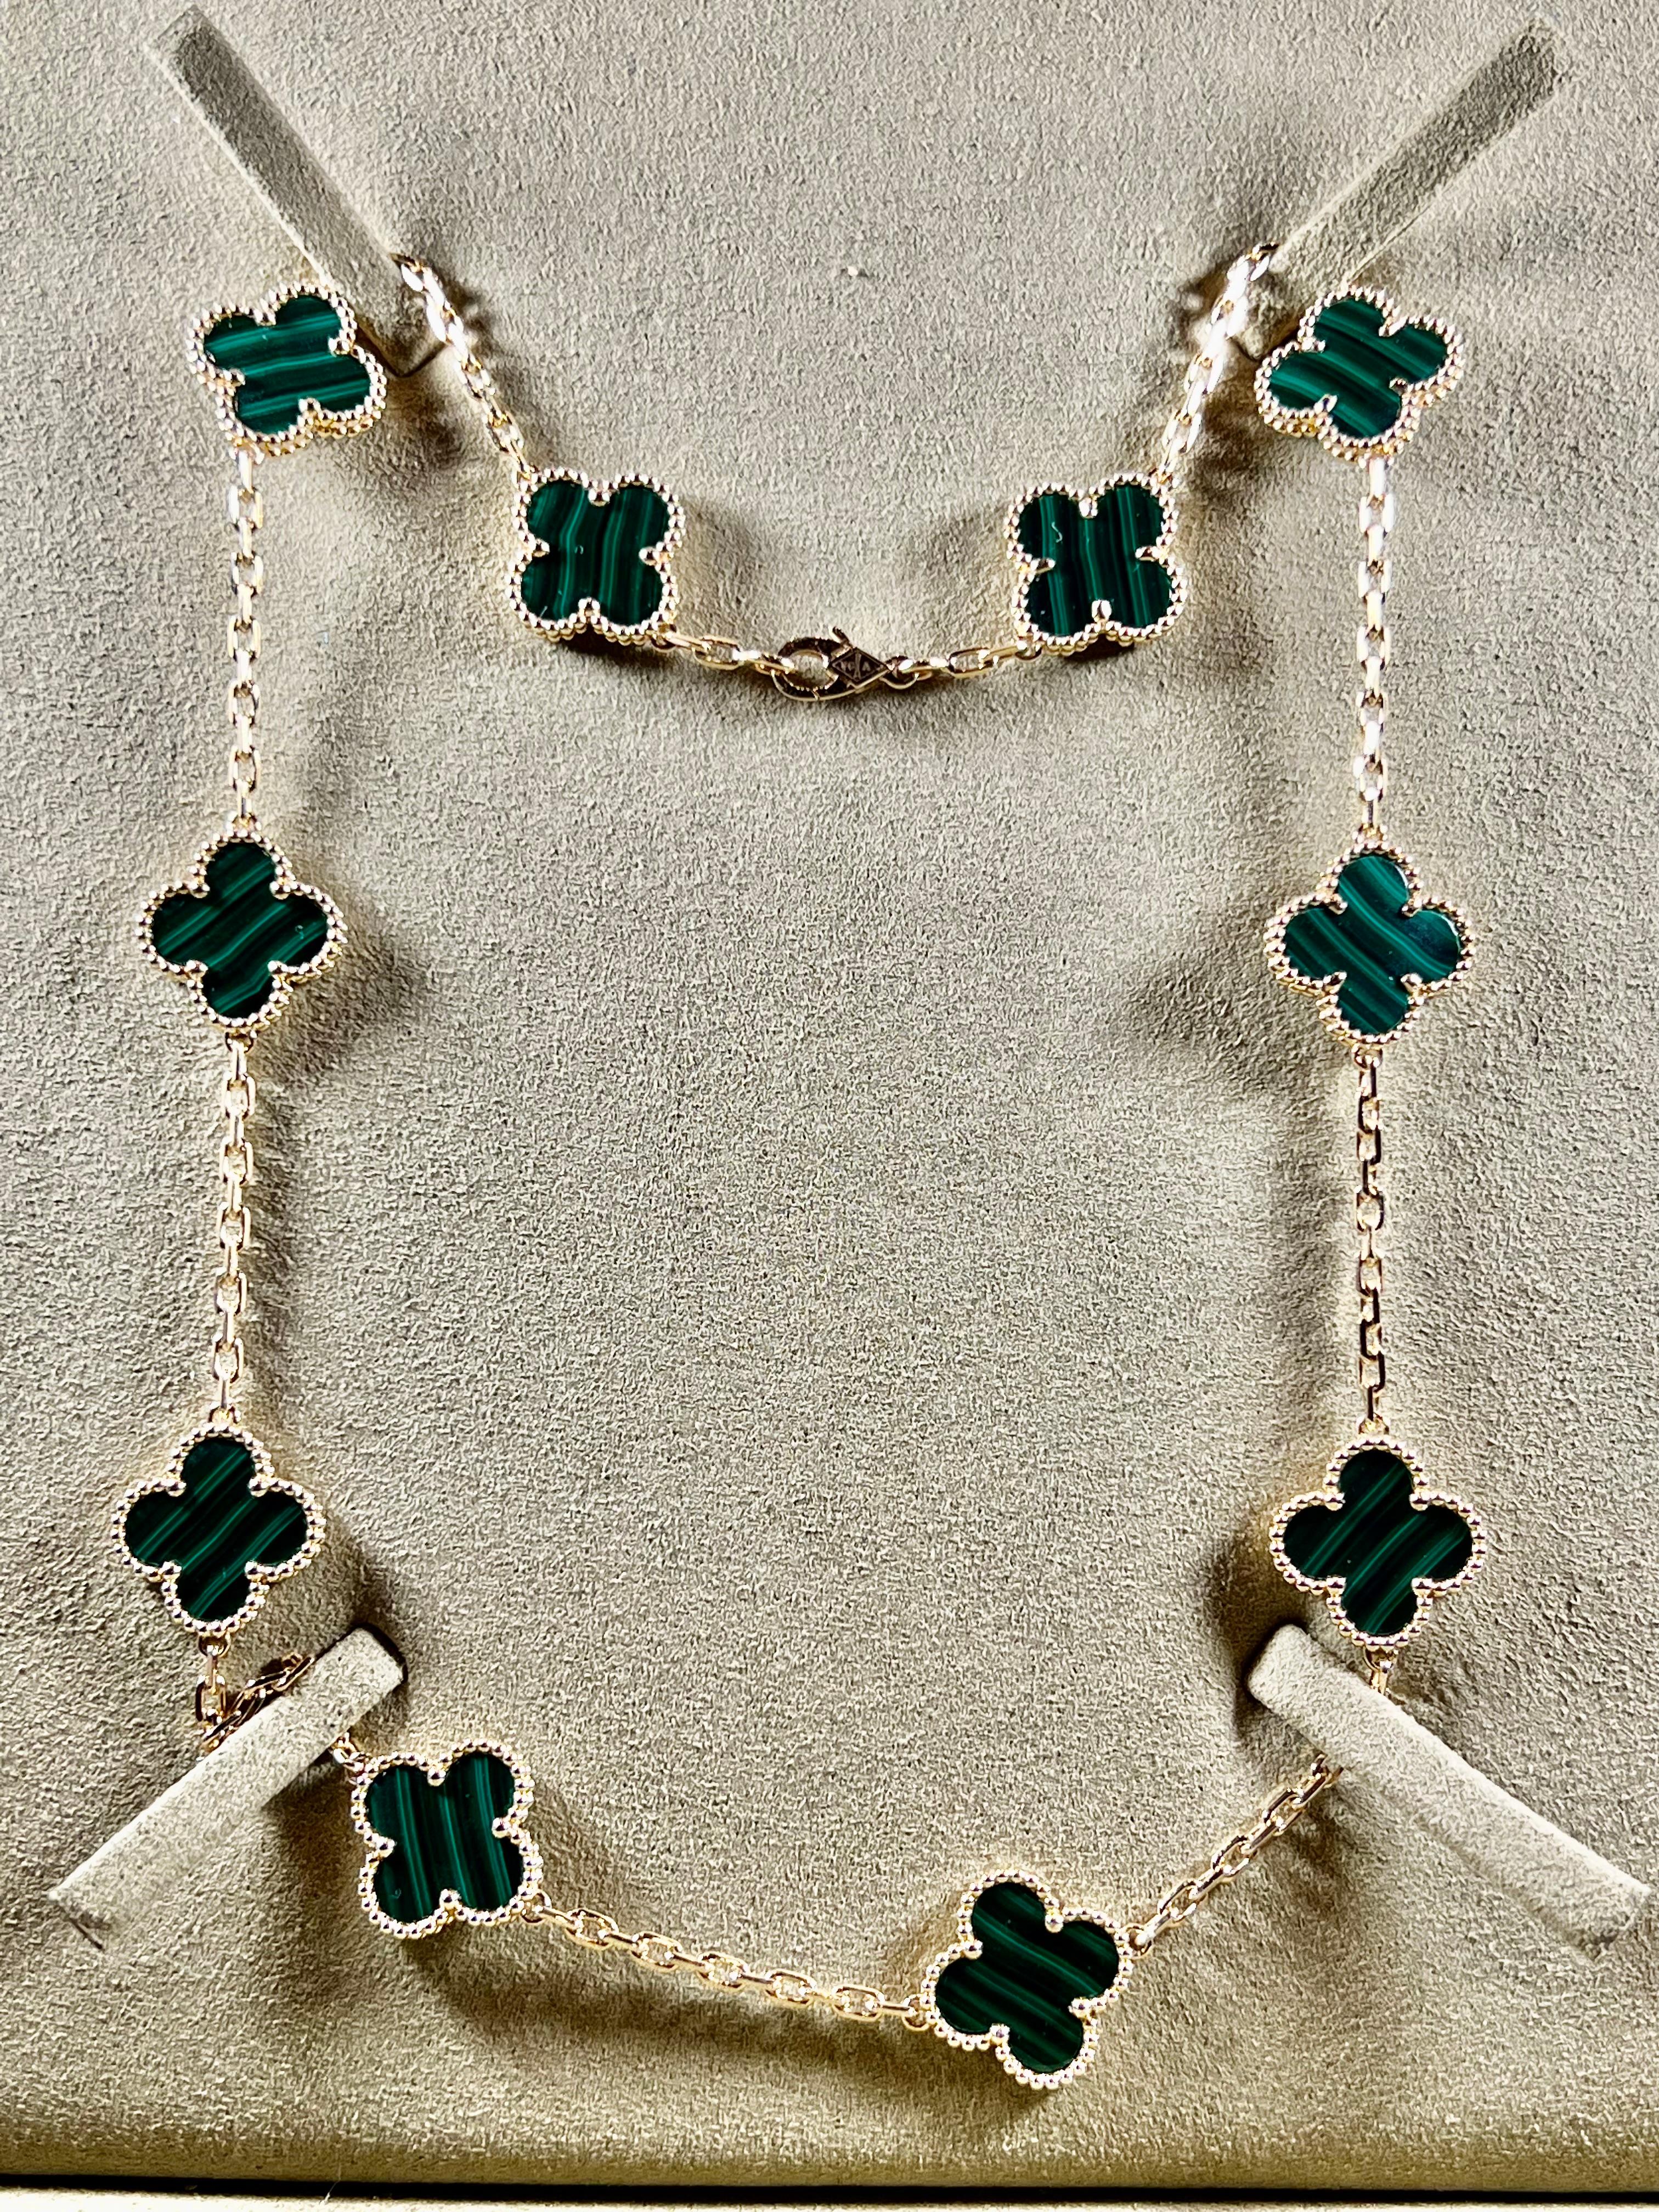 This classic vintage Van Cleef & Arpels necklace is crafted in 18k yellow gold and features 10 lucky clover motifs inlaid with green malachite in round bead settings. Made in France circa 2000. Measurements: 0.59